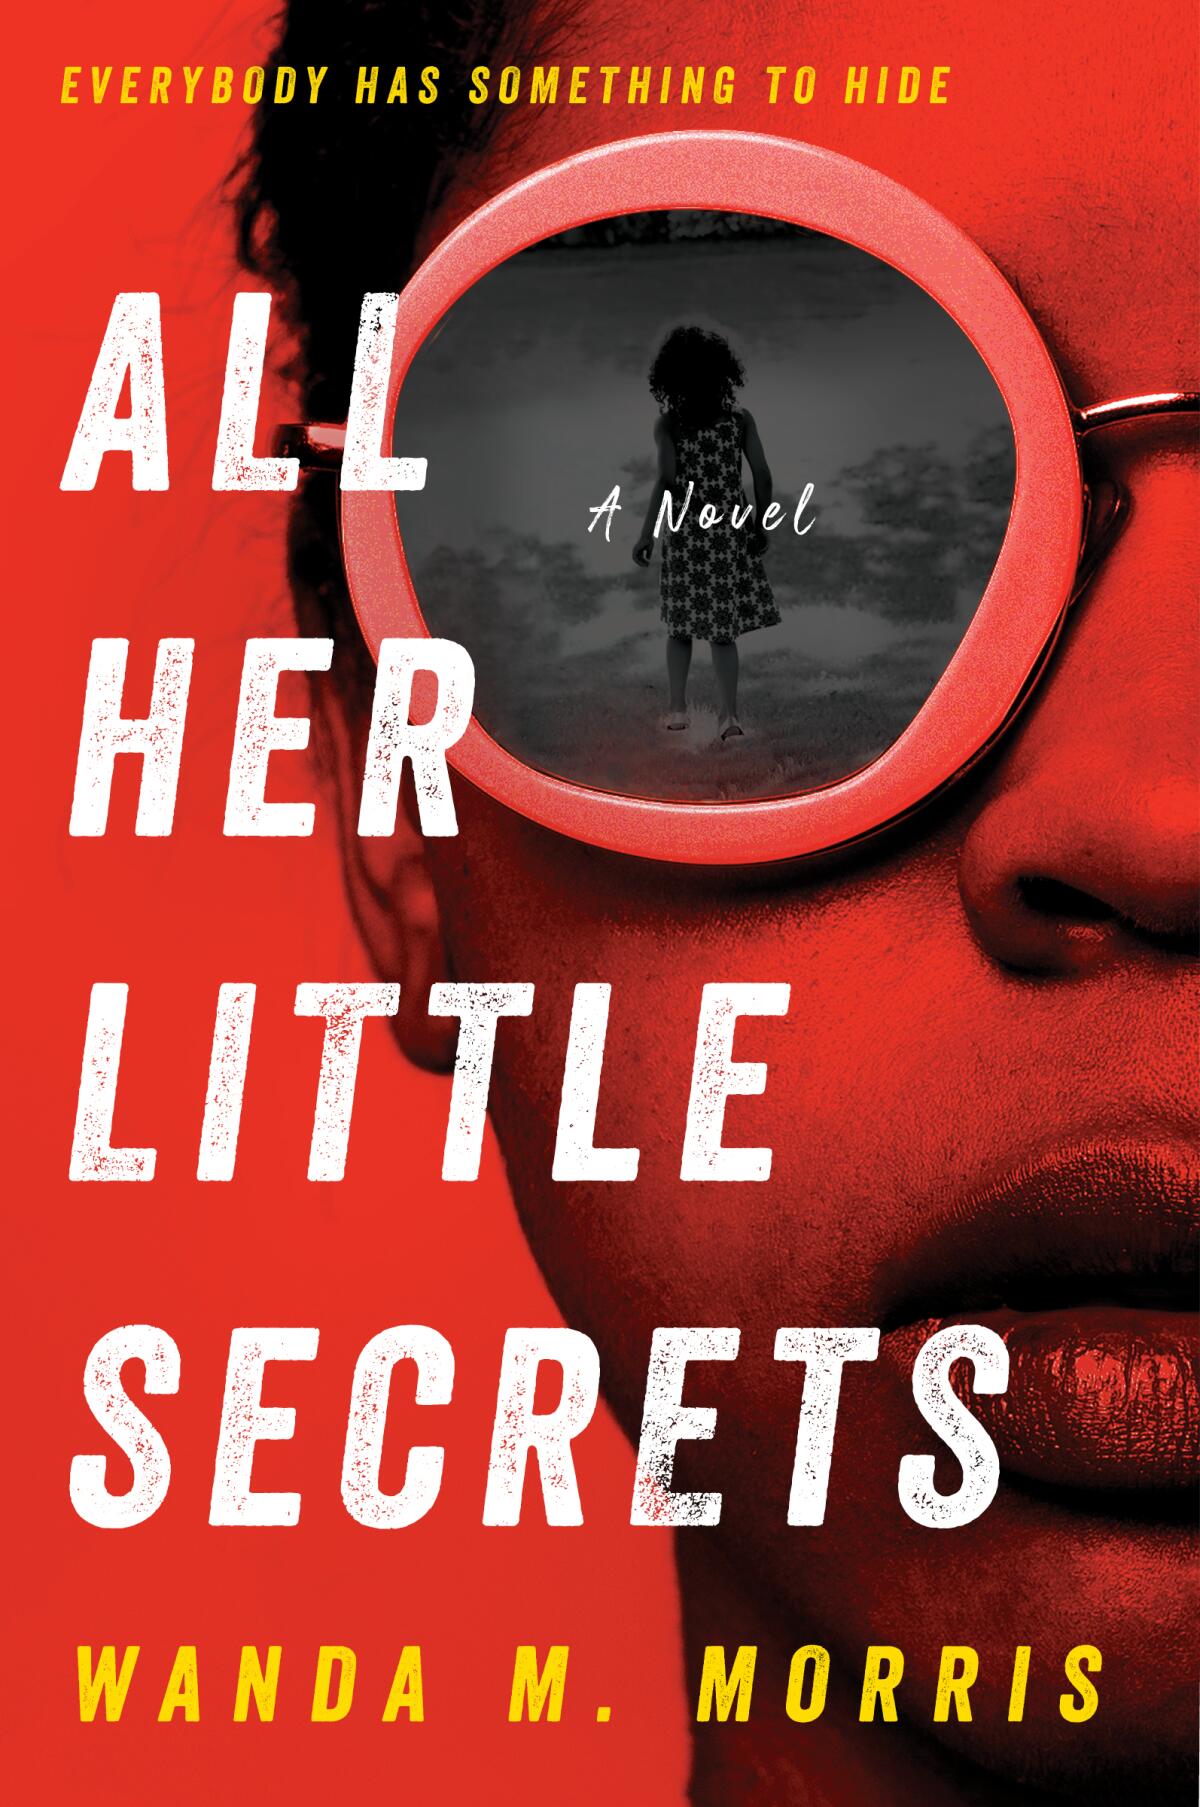 Book cover of "All Her Little Secrets" by Wanda M. Morris